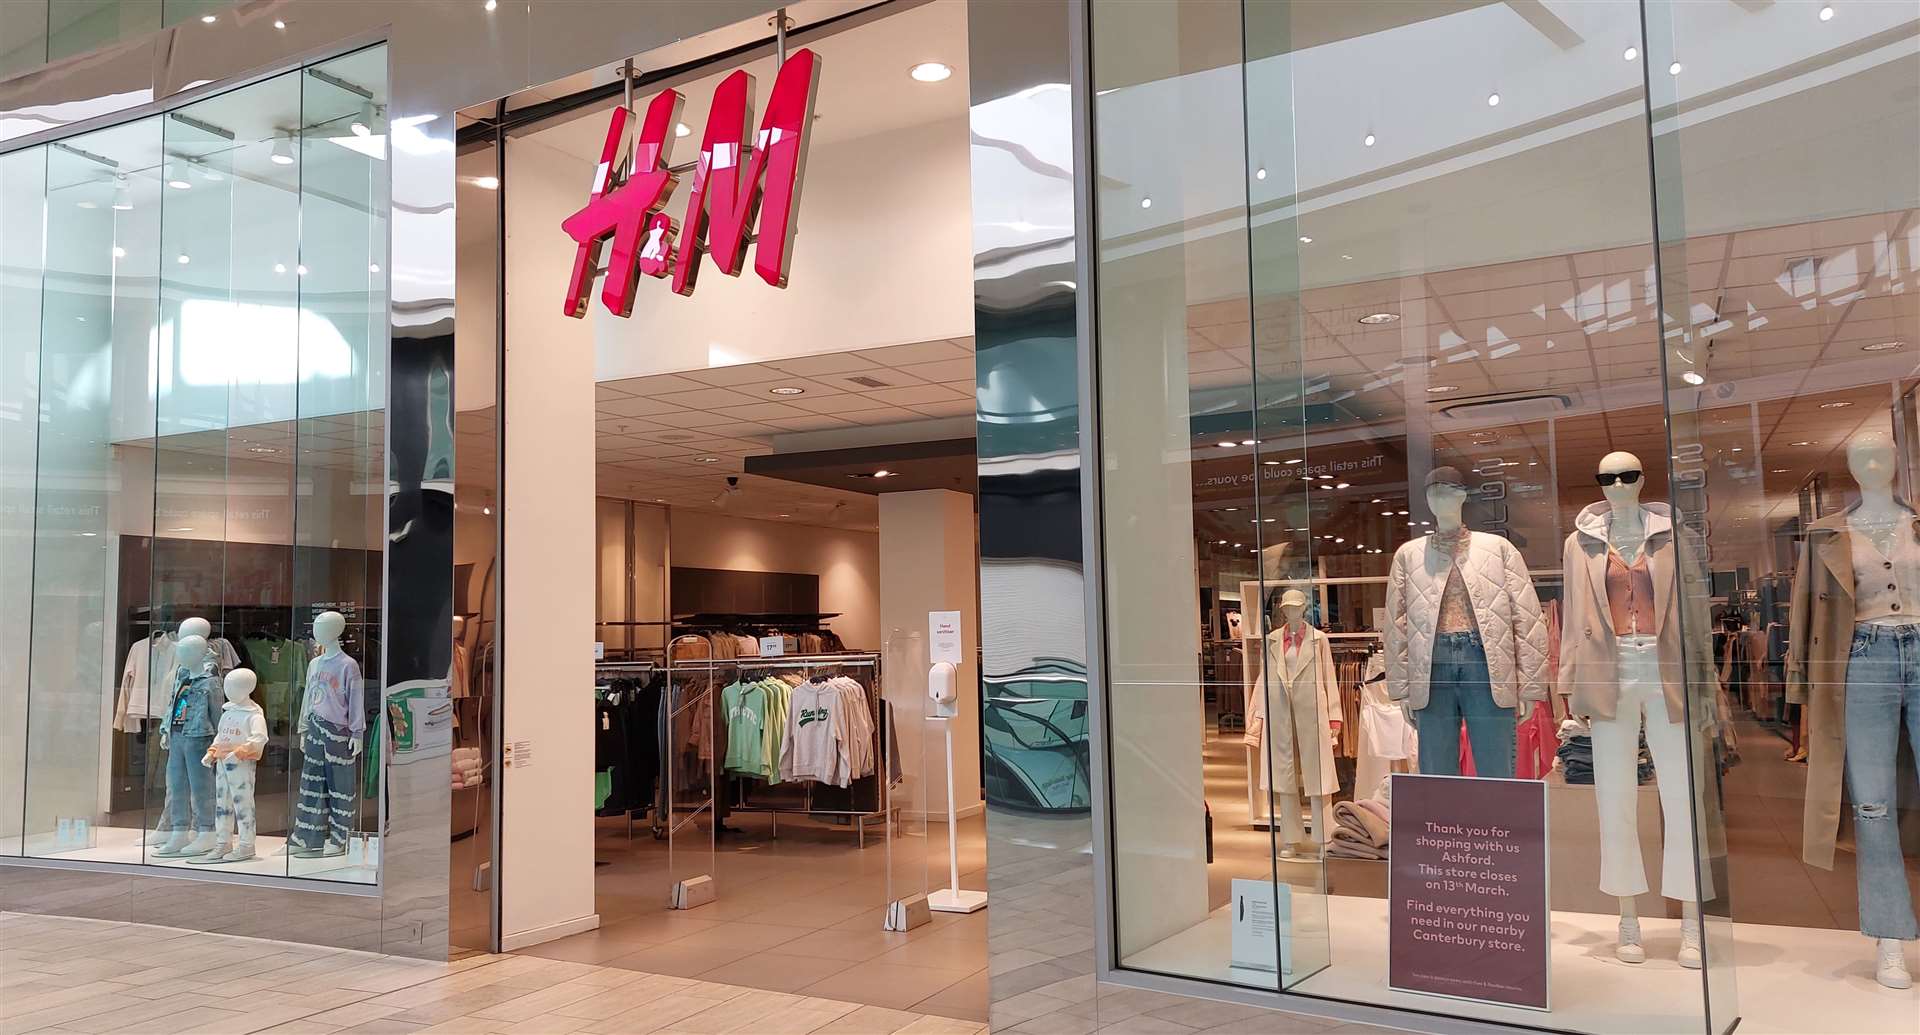 The two-storey H&M faces the empty Debenhams in County Square